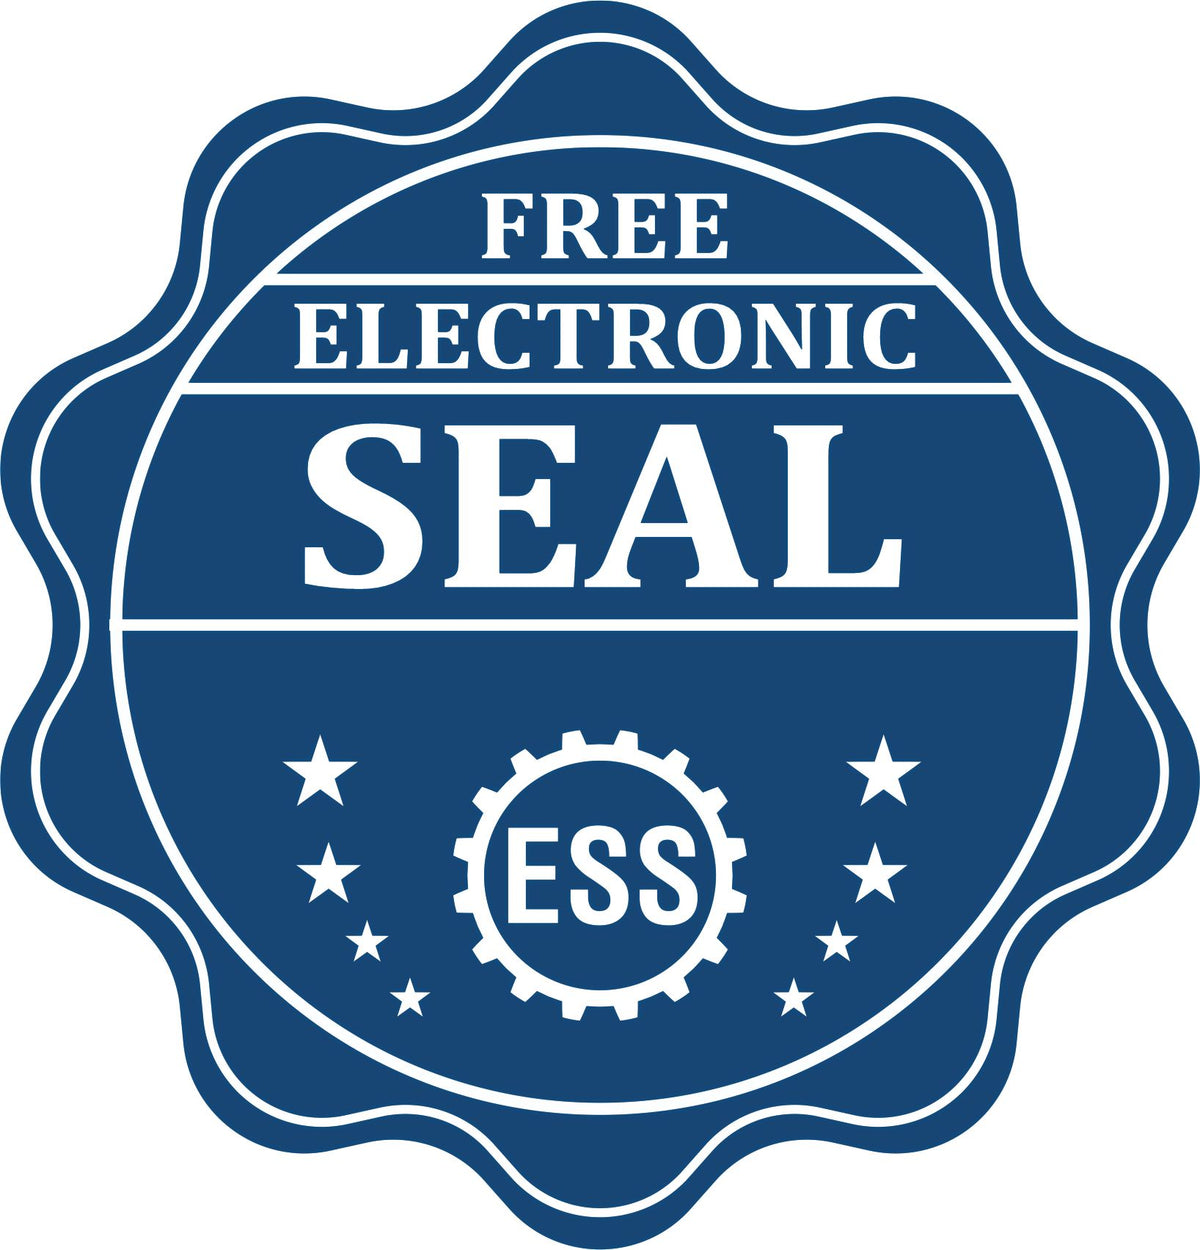 A badge showing a free electronic seal for the Soft Pocket Virginia Landscape Architect Embosser with stars and the ESS gear on the emblem.